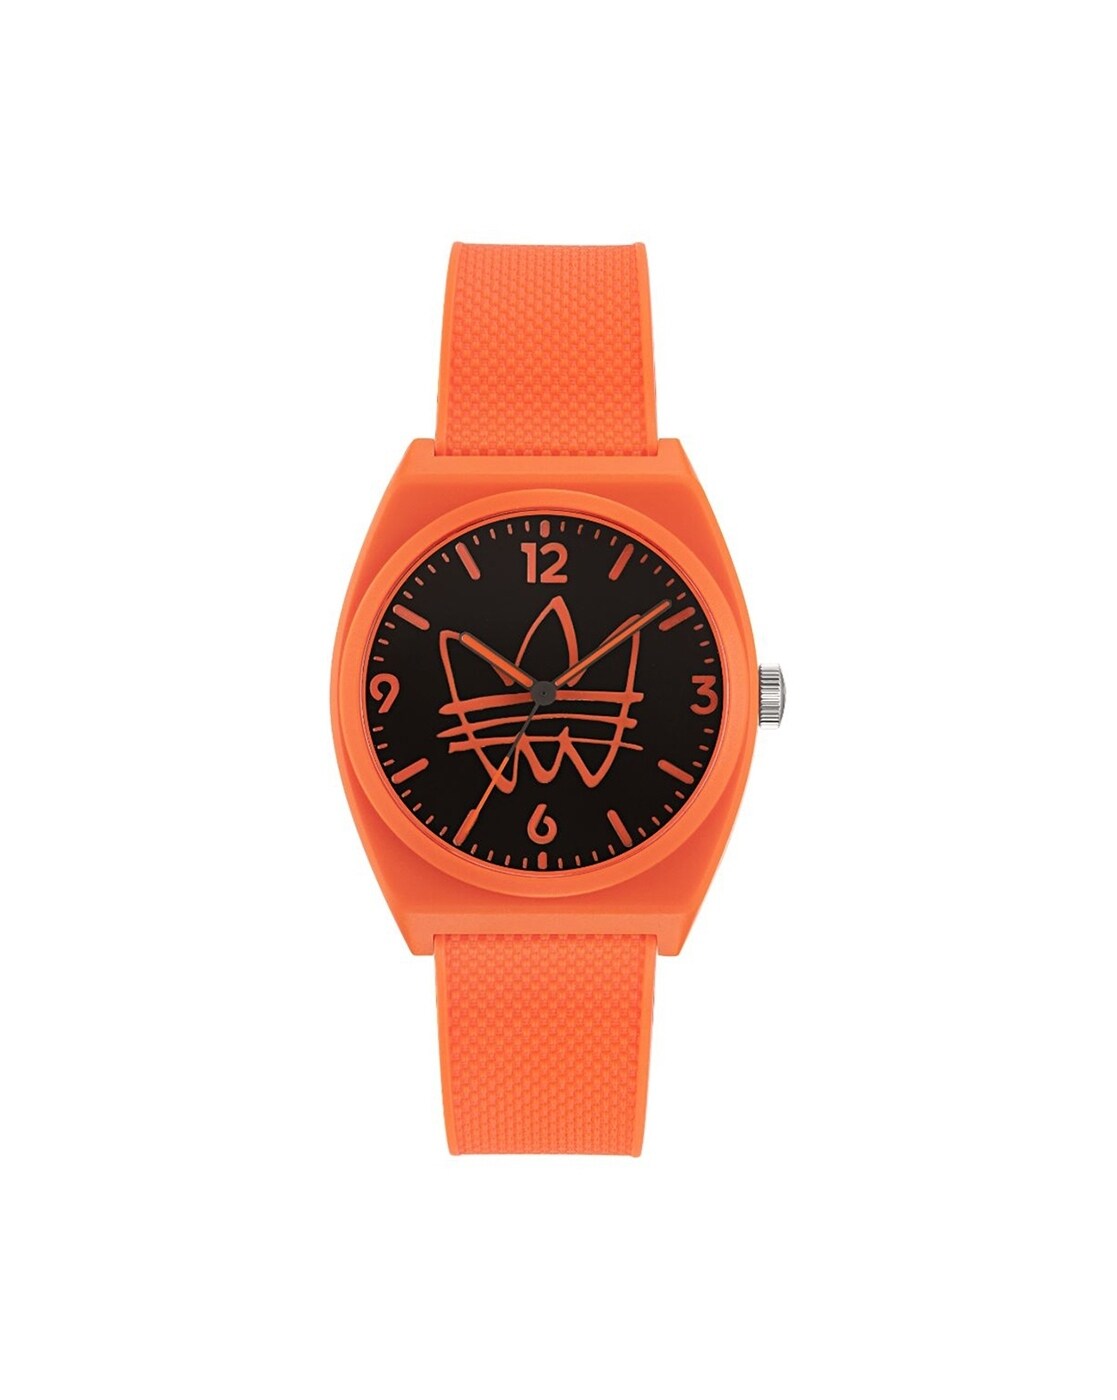 Best Orange Dial Watches for All Price Points in 2023 | TWR